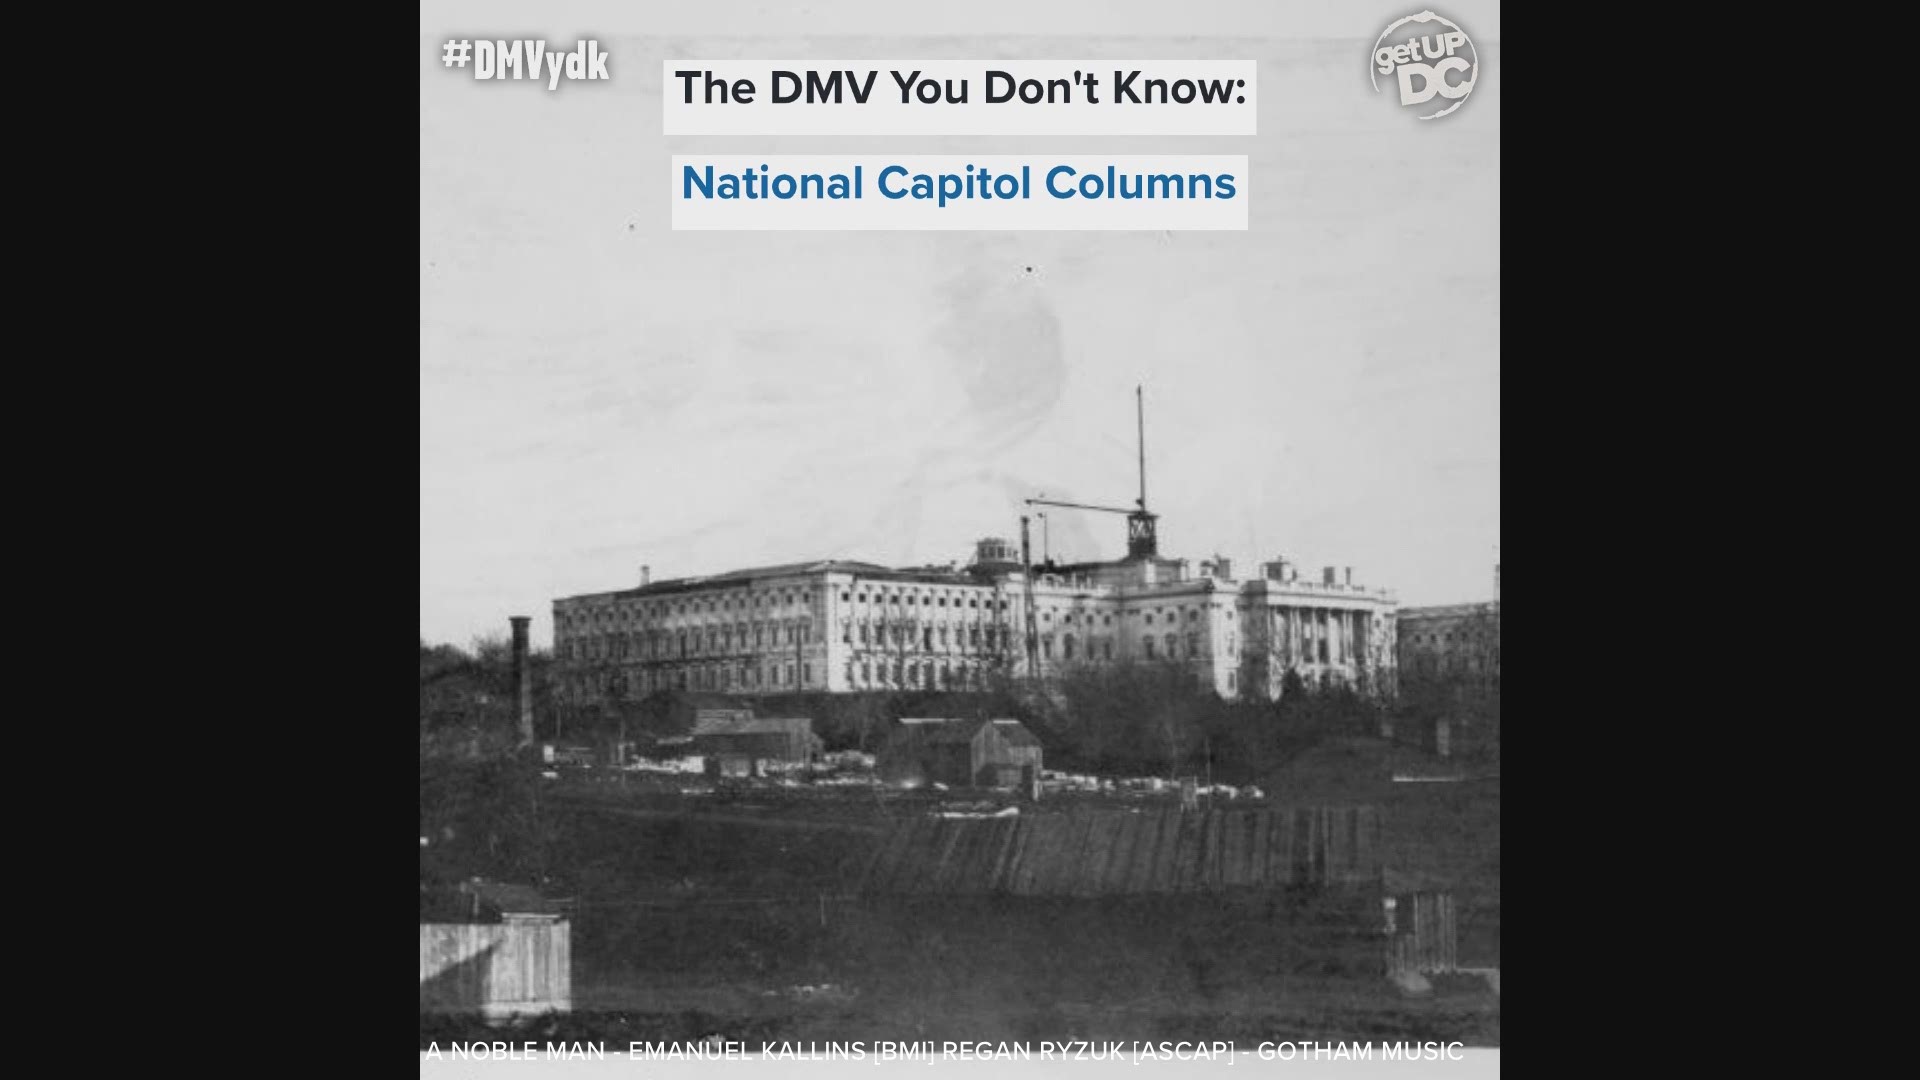 Here's a look at the history behind one of D.C.'s most unusual landmarks